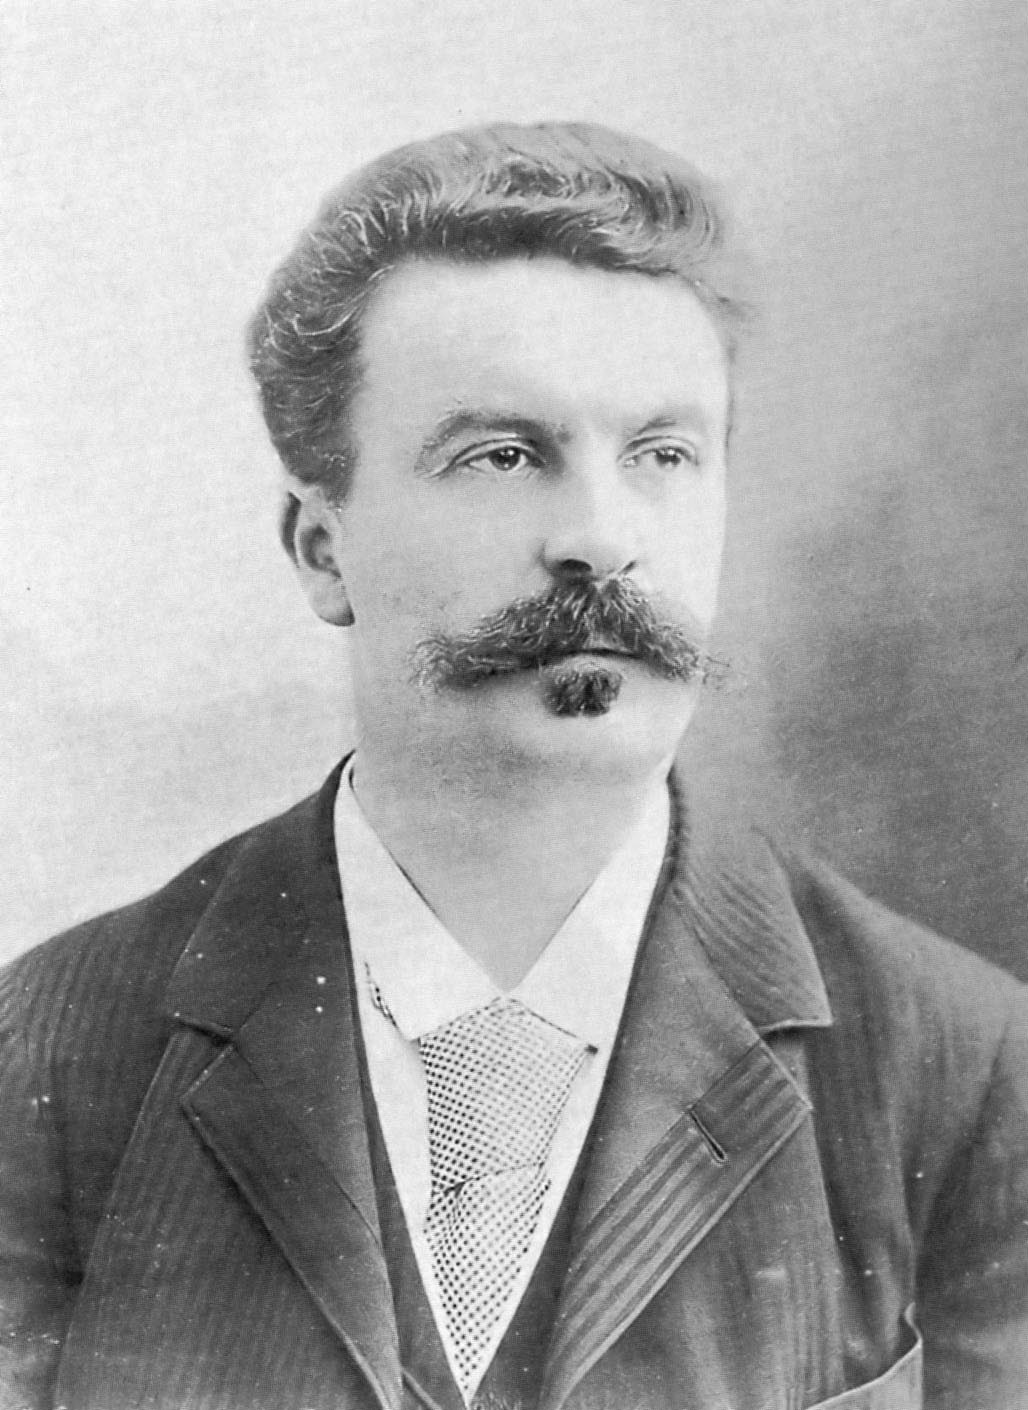 Quotes and Images From The Short Stories of Maupassant Guy de Maupassant